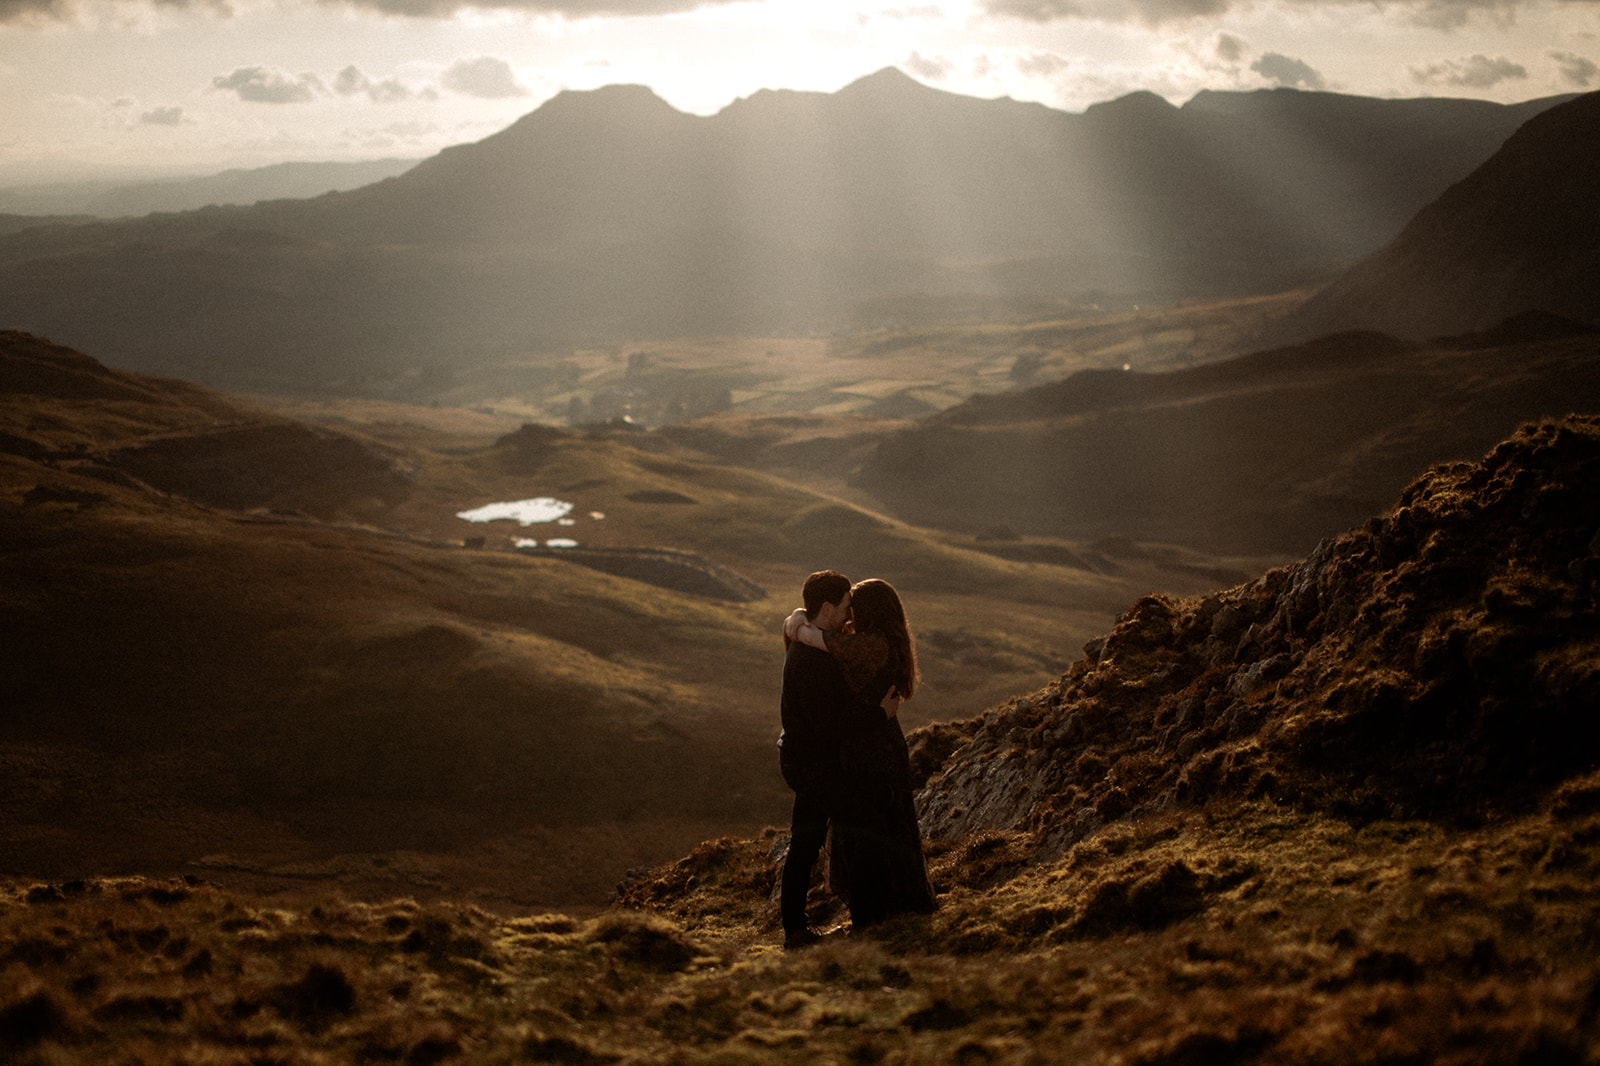 A couple enjoying their pre-wedding photography adventure at sunset in Snowdonia.